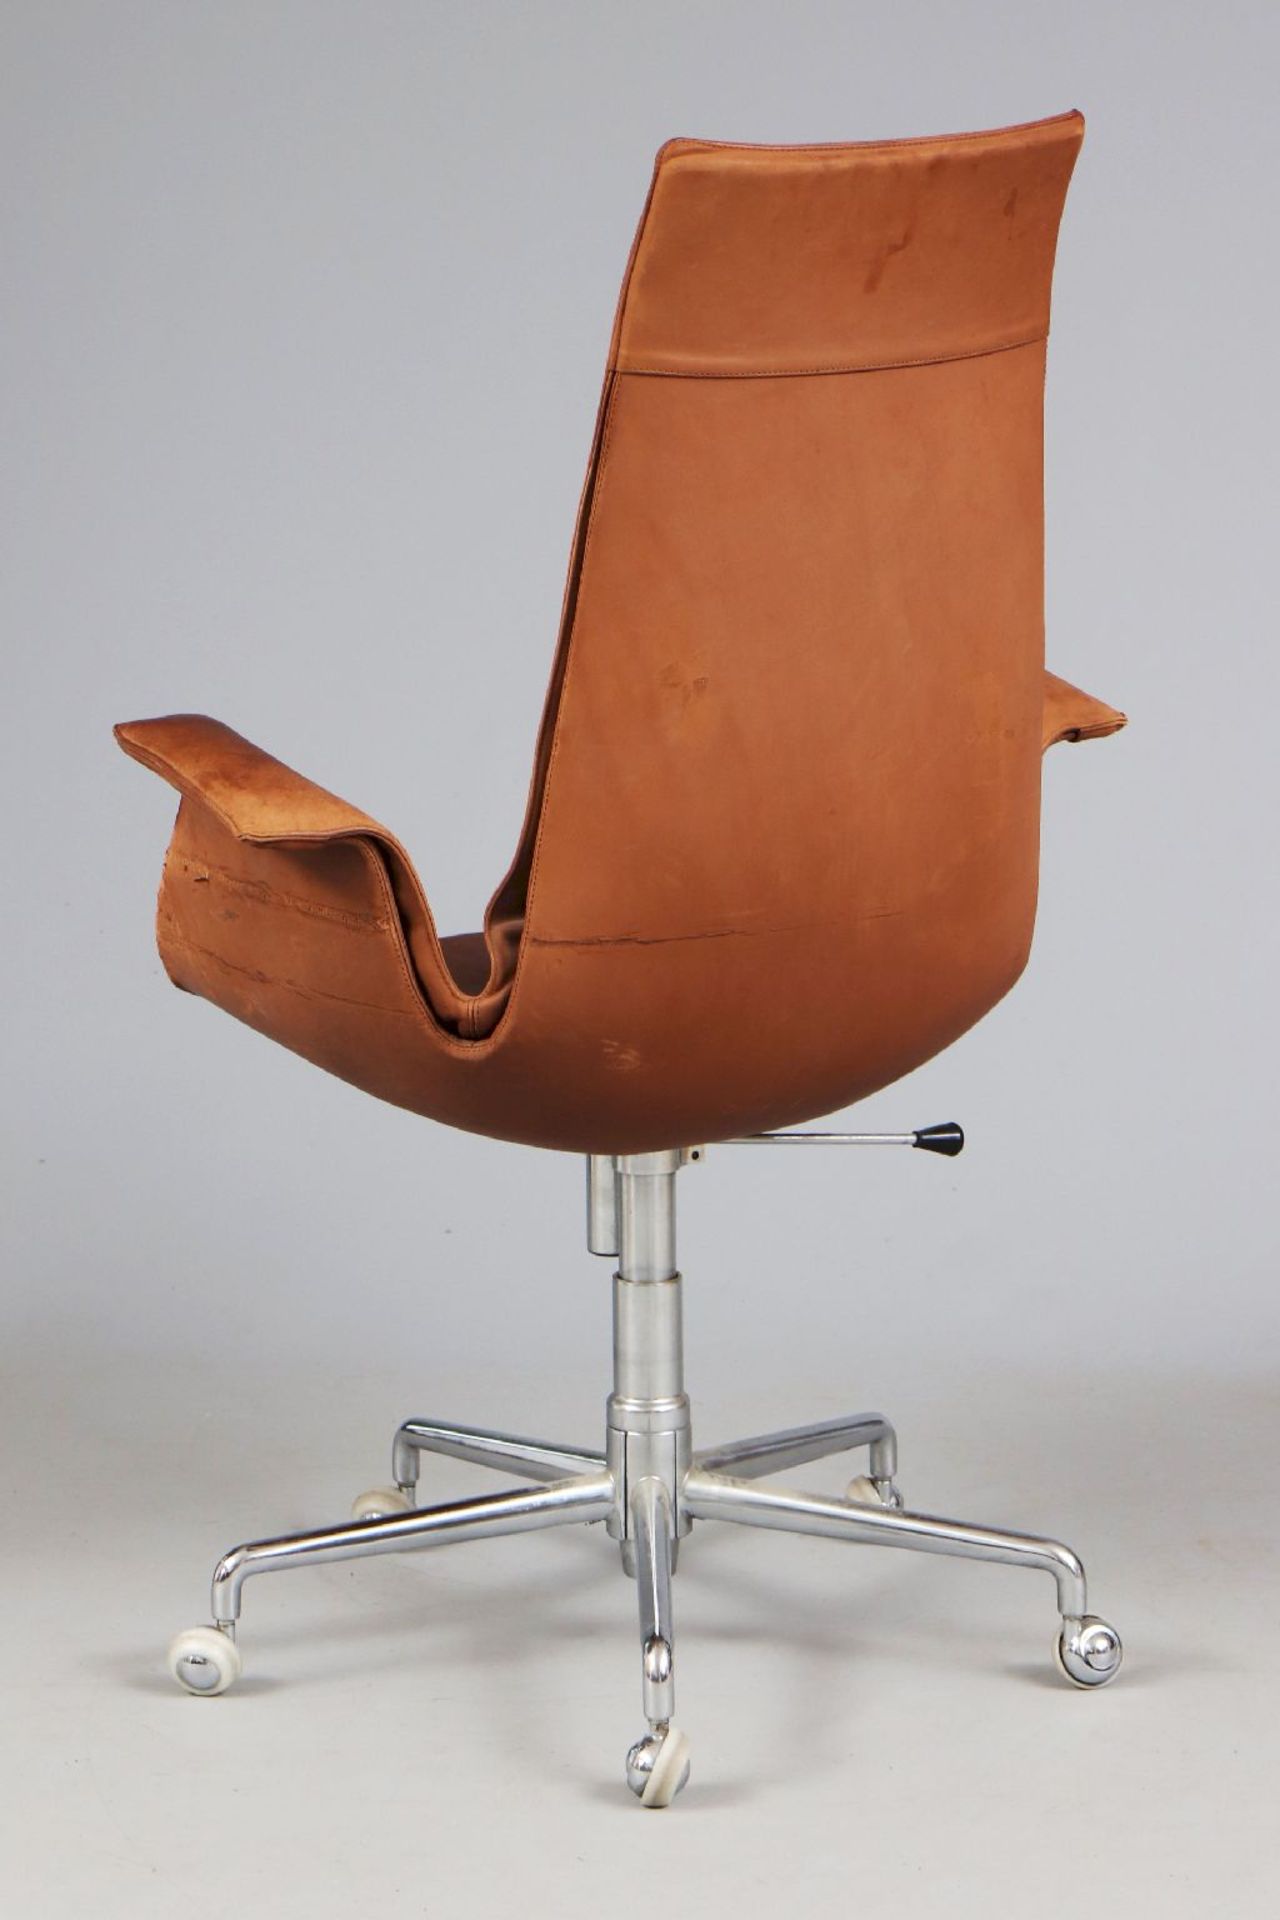 FK 6725 Tulip Chair - Image 3 of 6